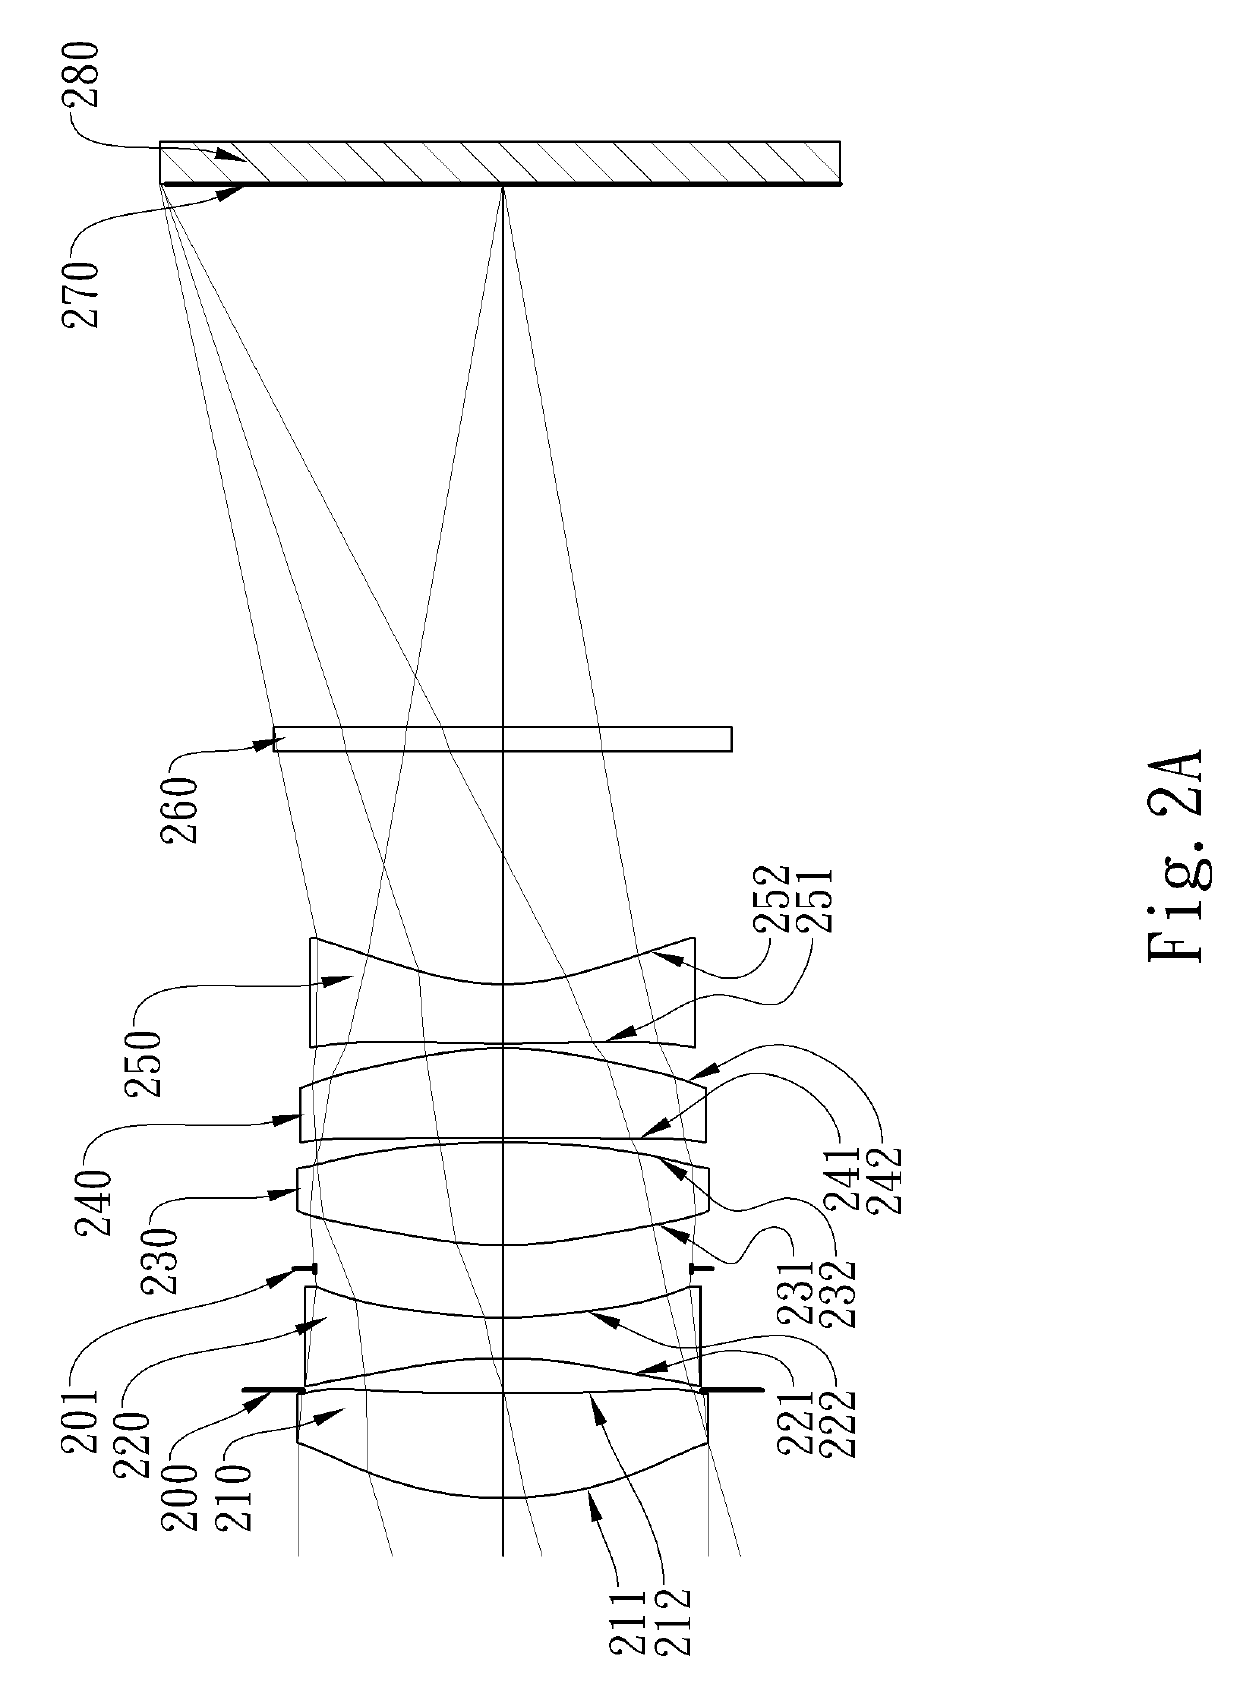 Optical imaging system, imaging apparatus and electronic device